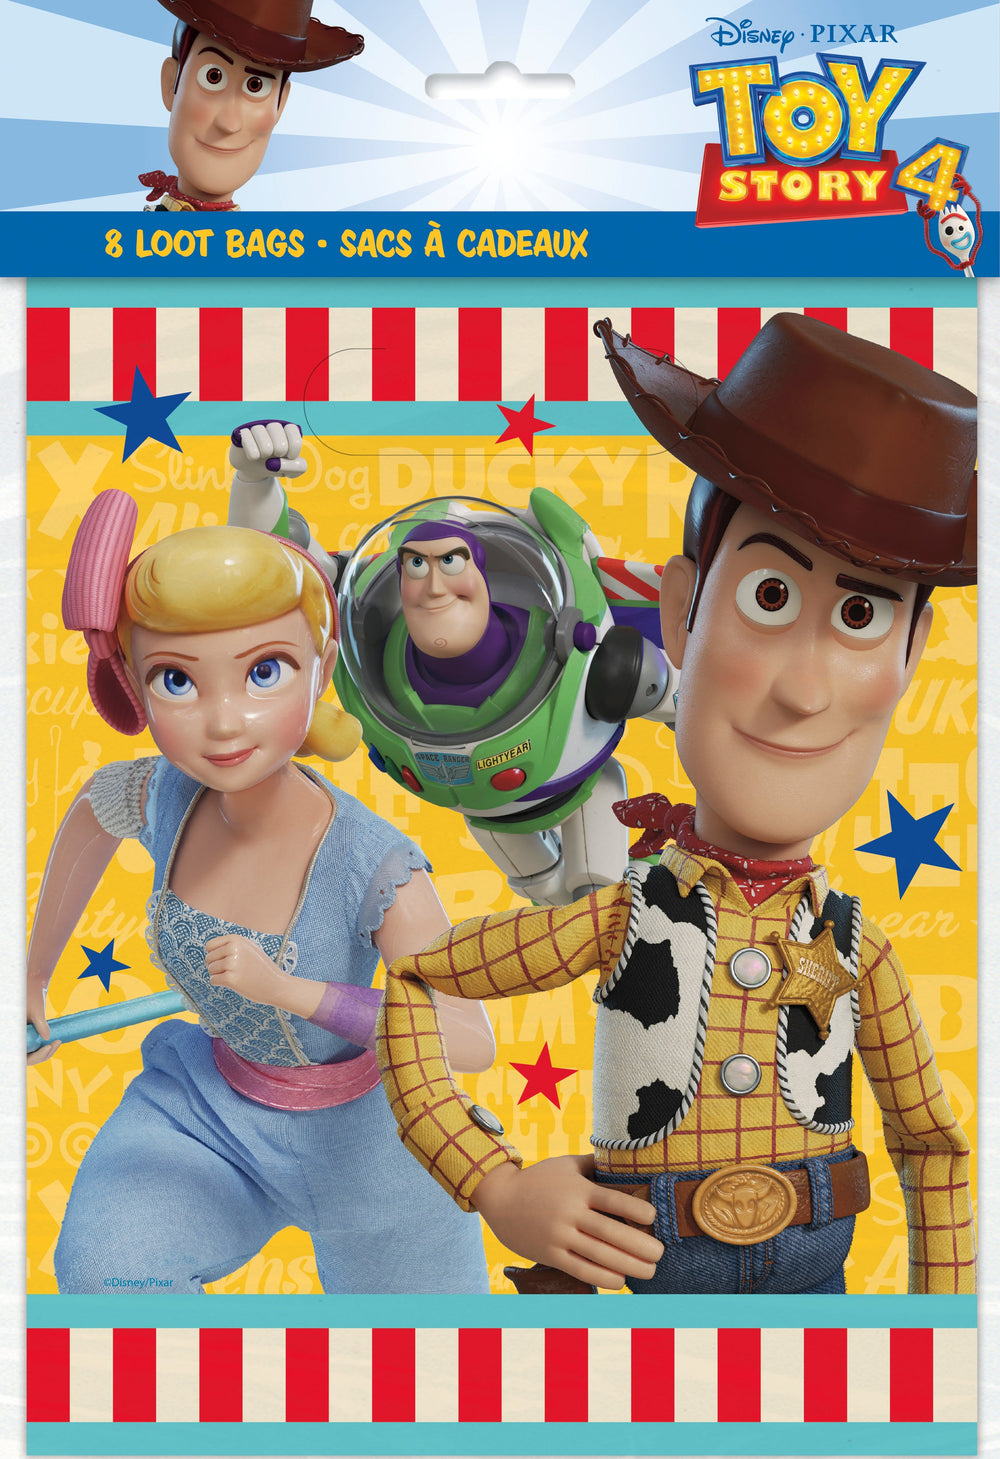 Join the Toy Story Adventure with Buzz and Woody Loot Bags!